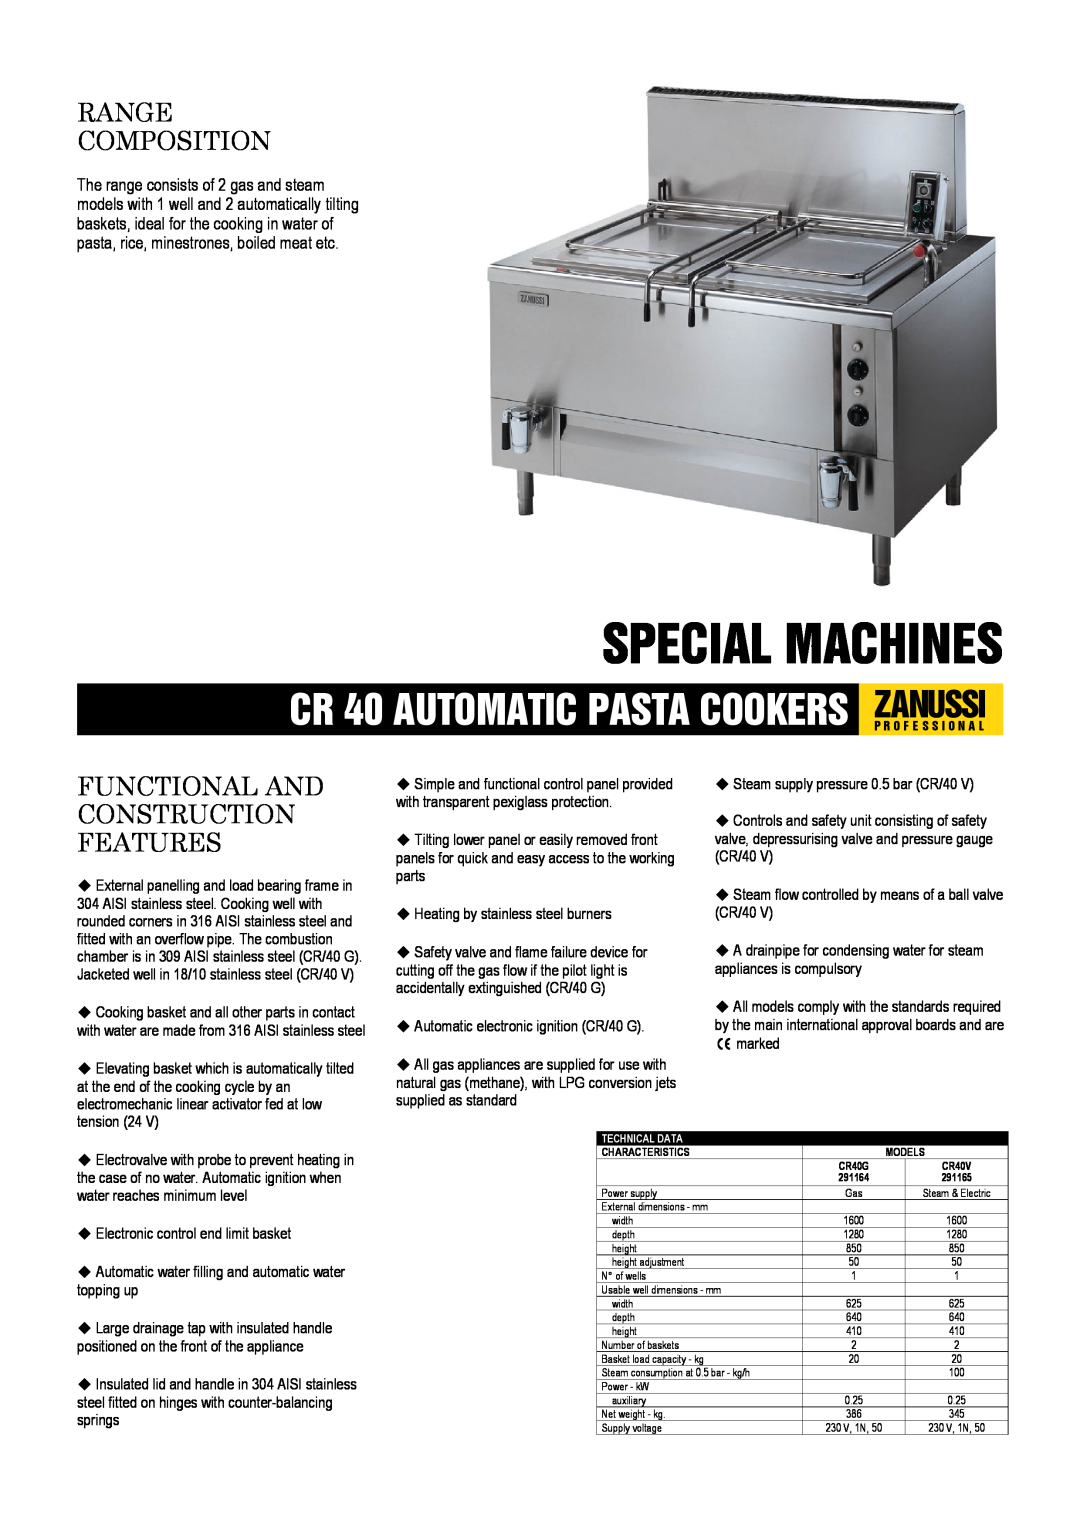 Zanussi 291164, 291165, CR40V, CR40G dimensions Special Machines, Range Composition, Functional And Construction Features 